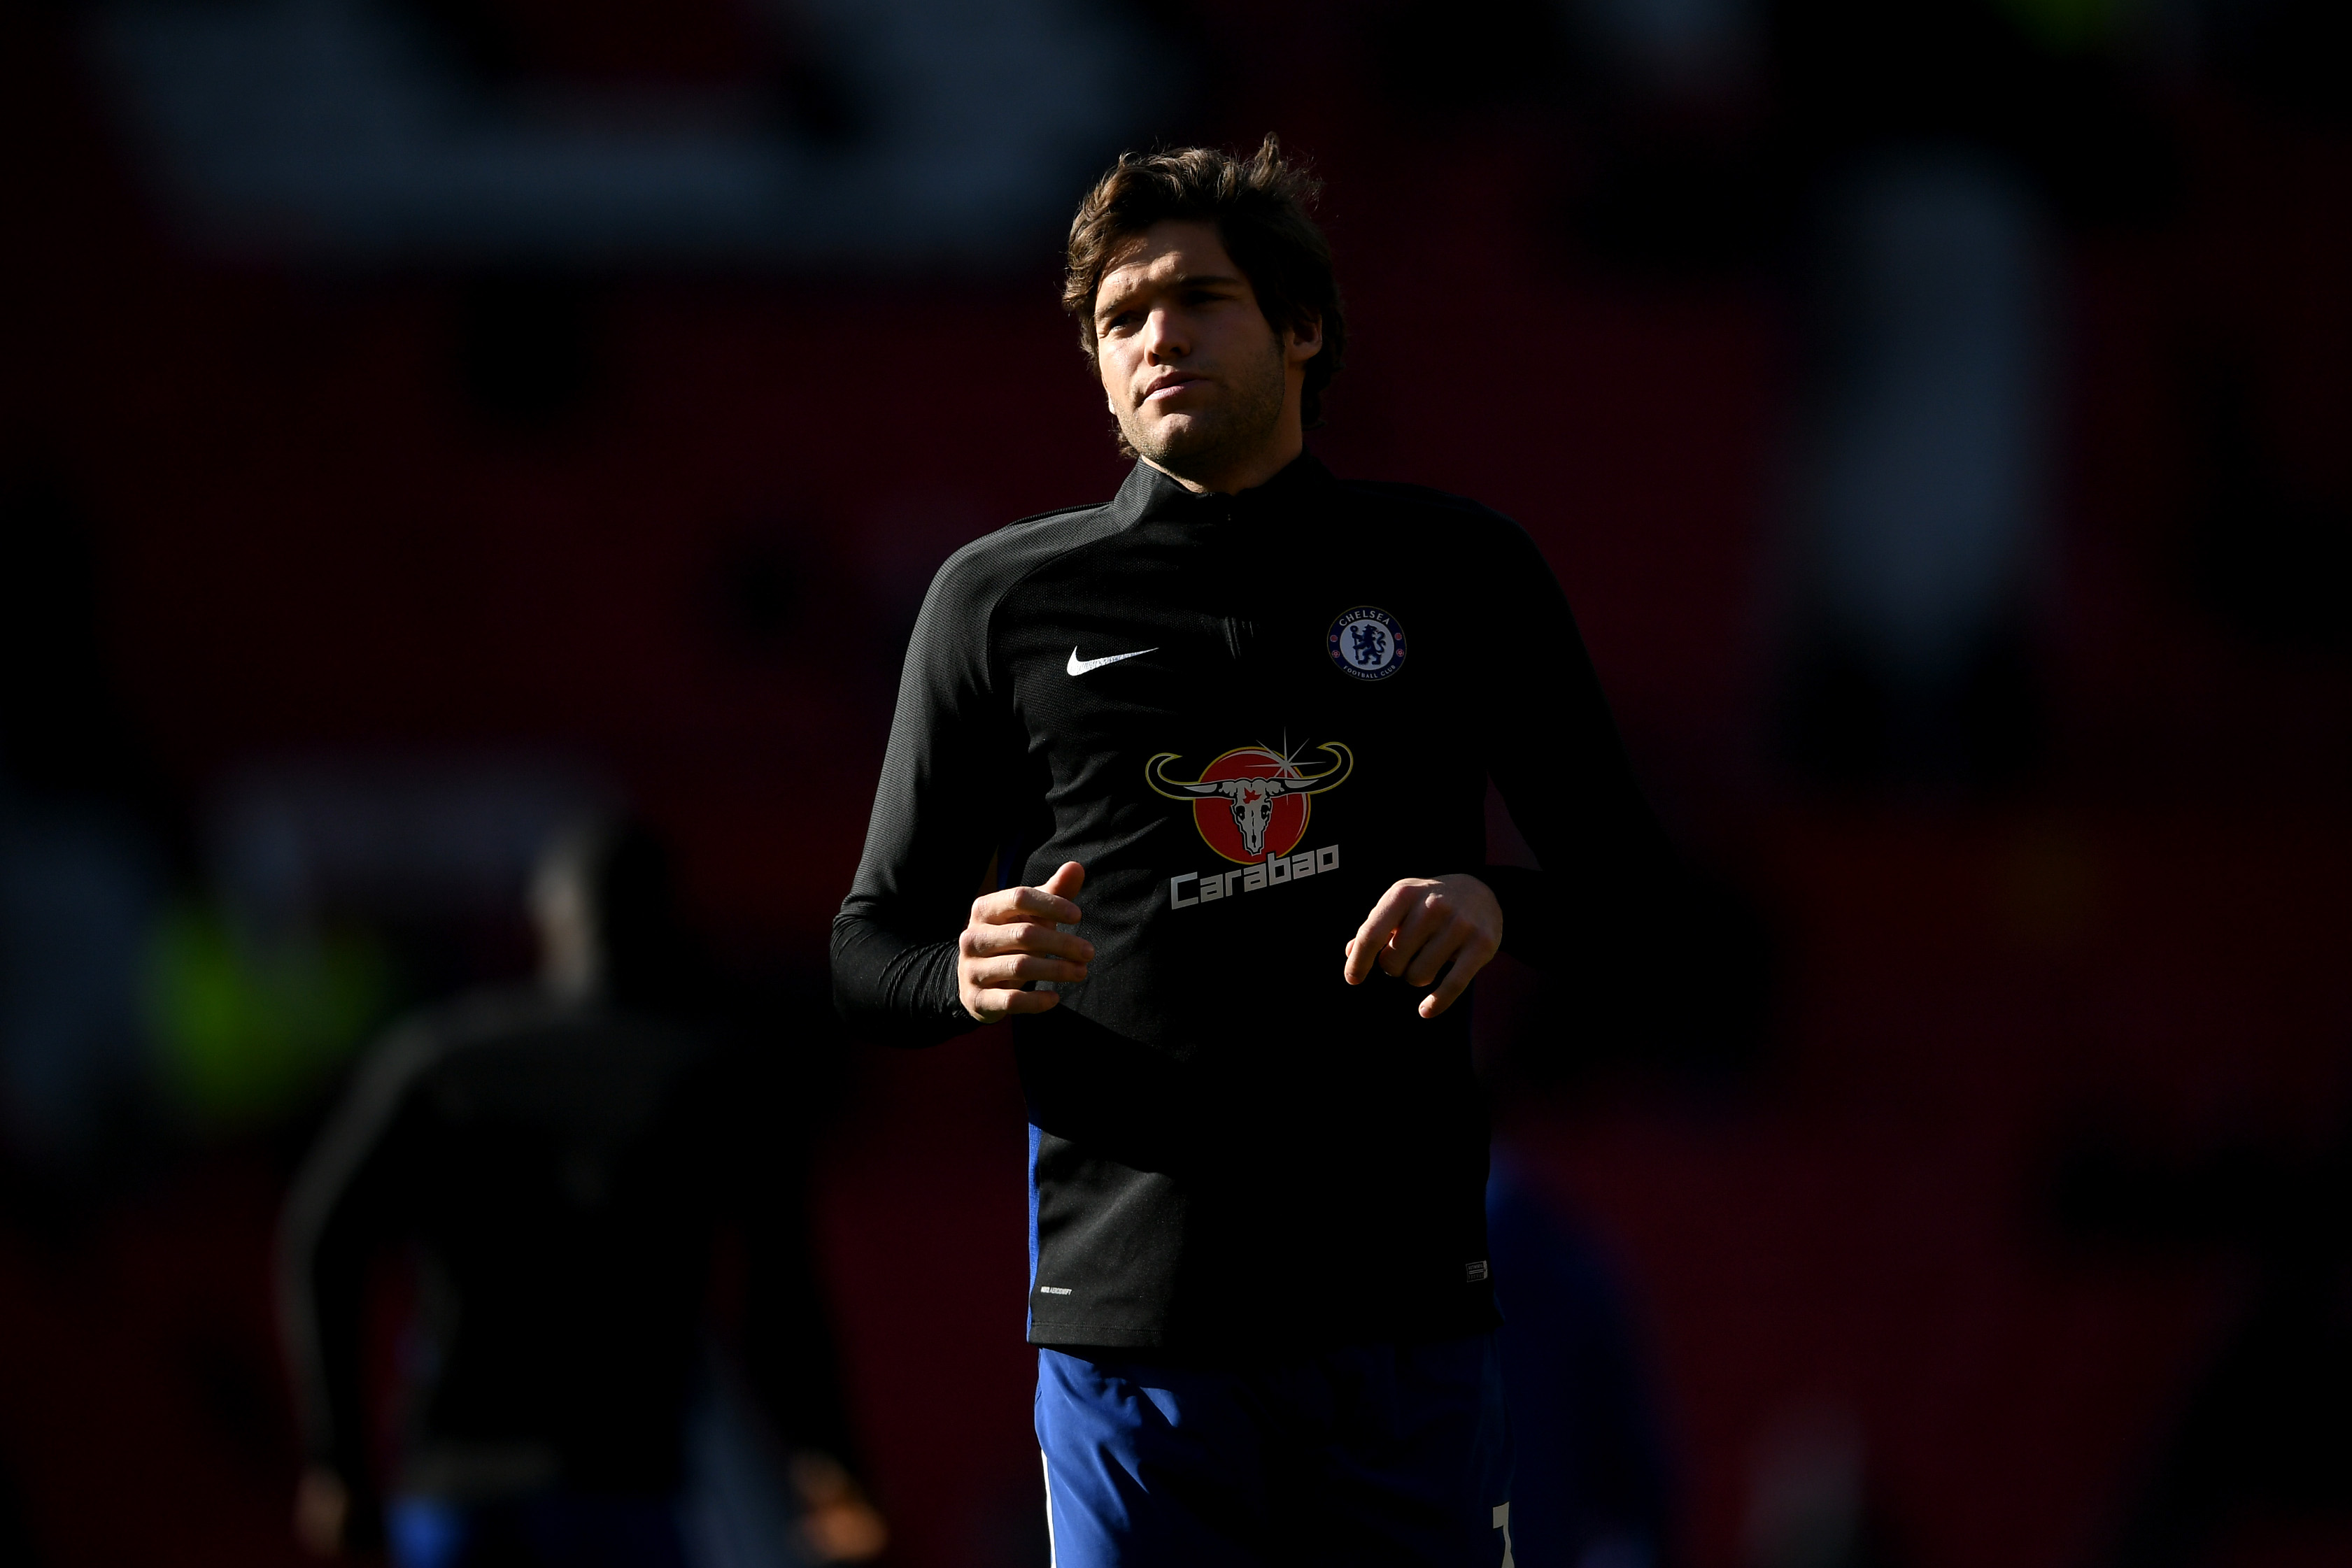 MANCHESTER, ENGLAND - FEBRUARY 25:  Marcos Alonso of Chelsea warms up the Premier League match between Manchester United and Chelsea at Old Trafford on February 25, 2018 in Manchester, England.  (Photo by Laurence Griffiths/Getty Images)